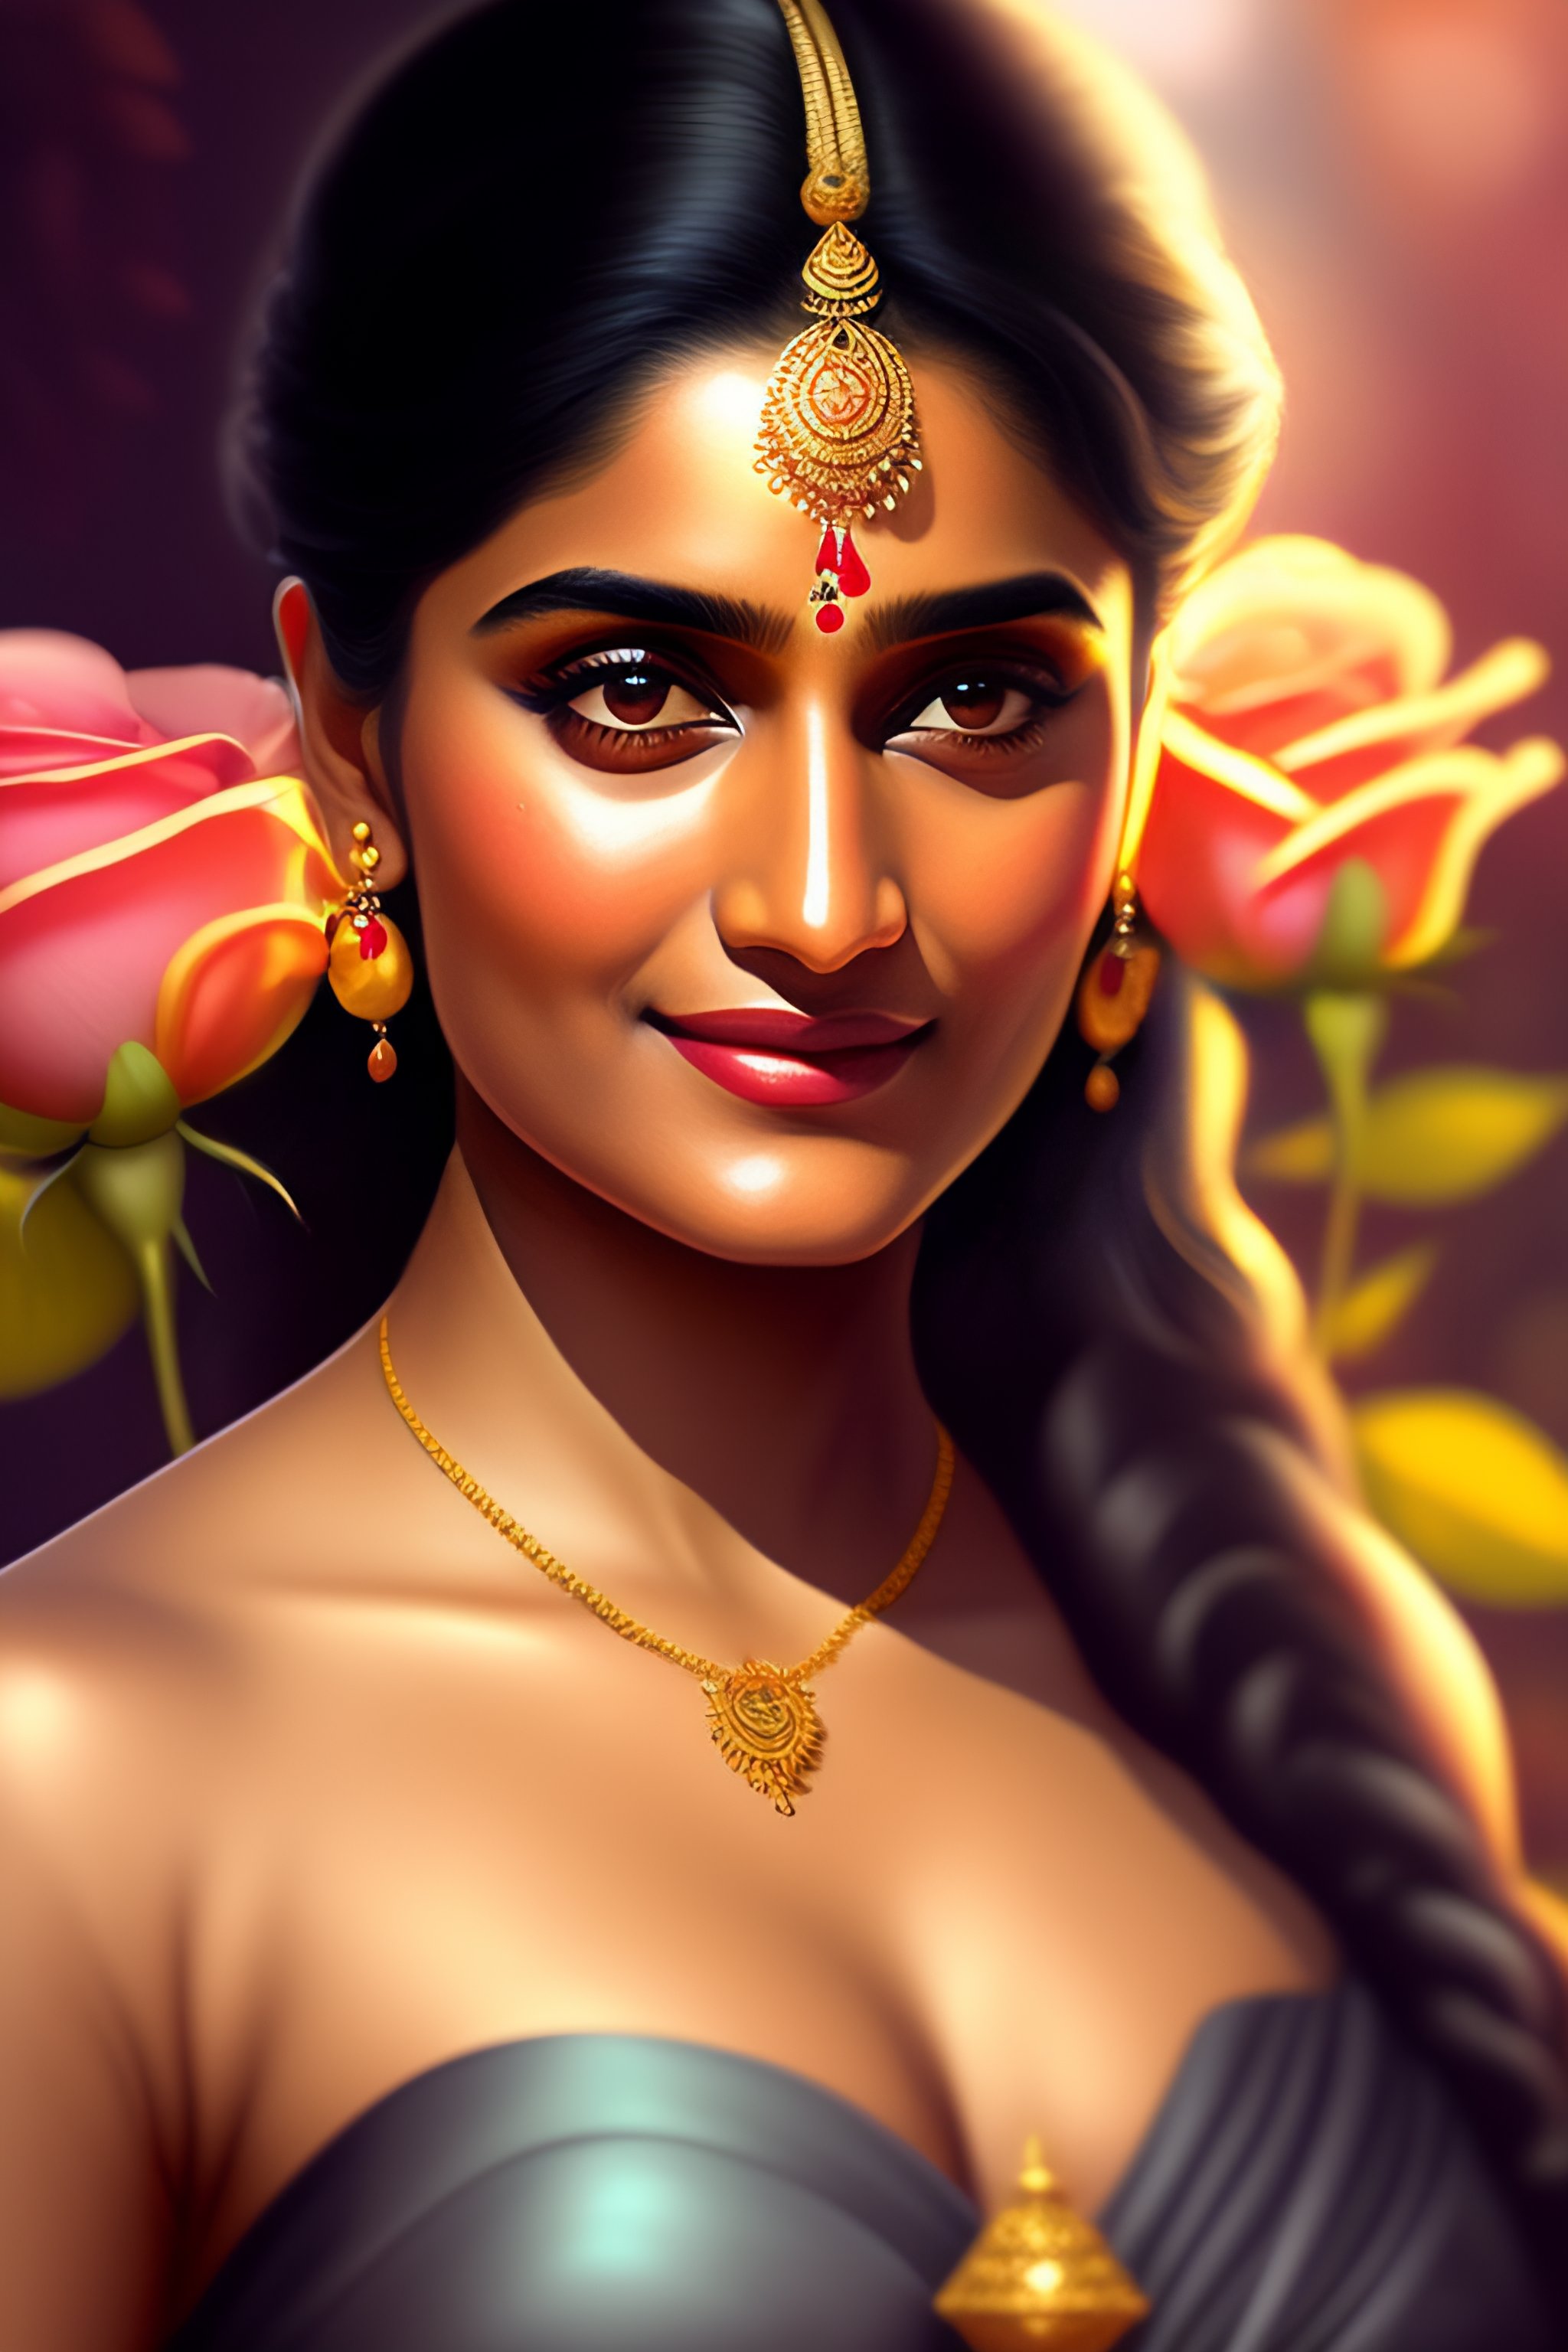 Lexica - Spanish woman niveda thomas, smelling a flower, roses everywhere,  highly detailed, silver bra with golden line design, large bra, with  golde